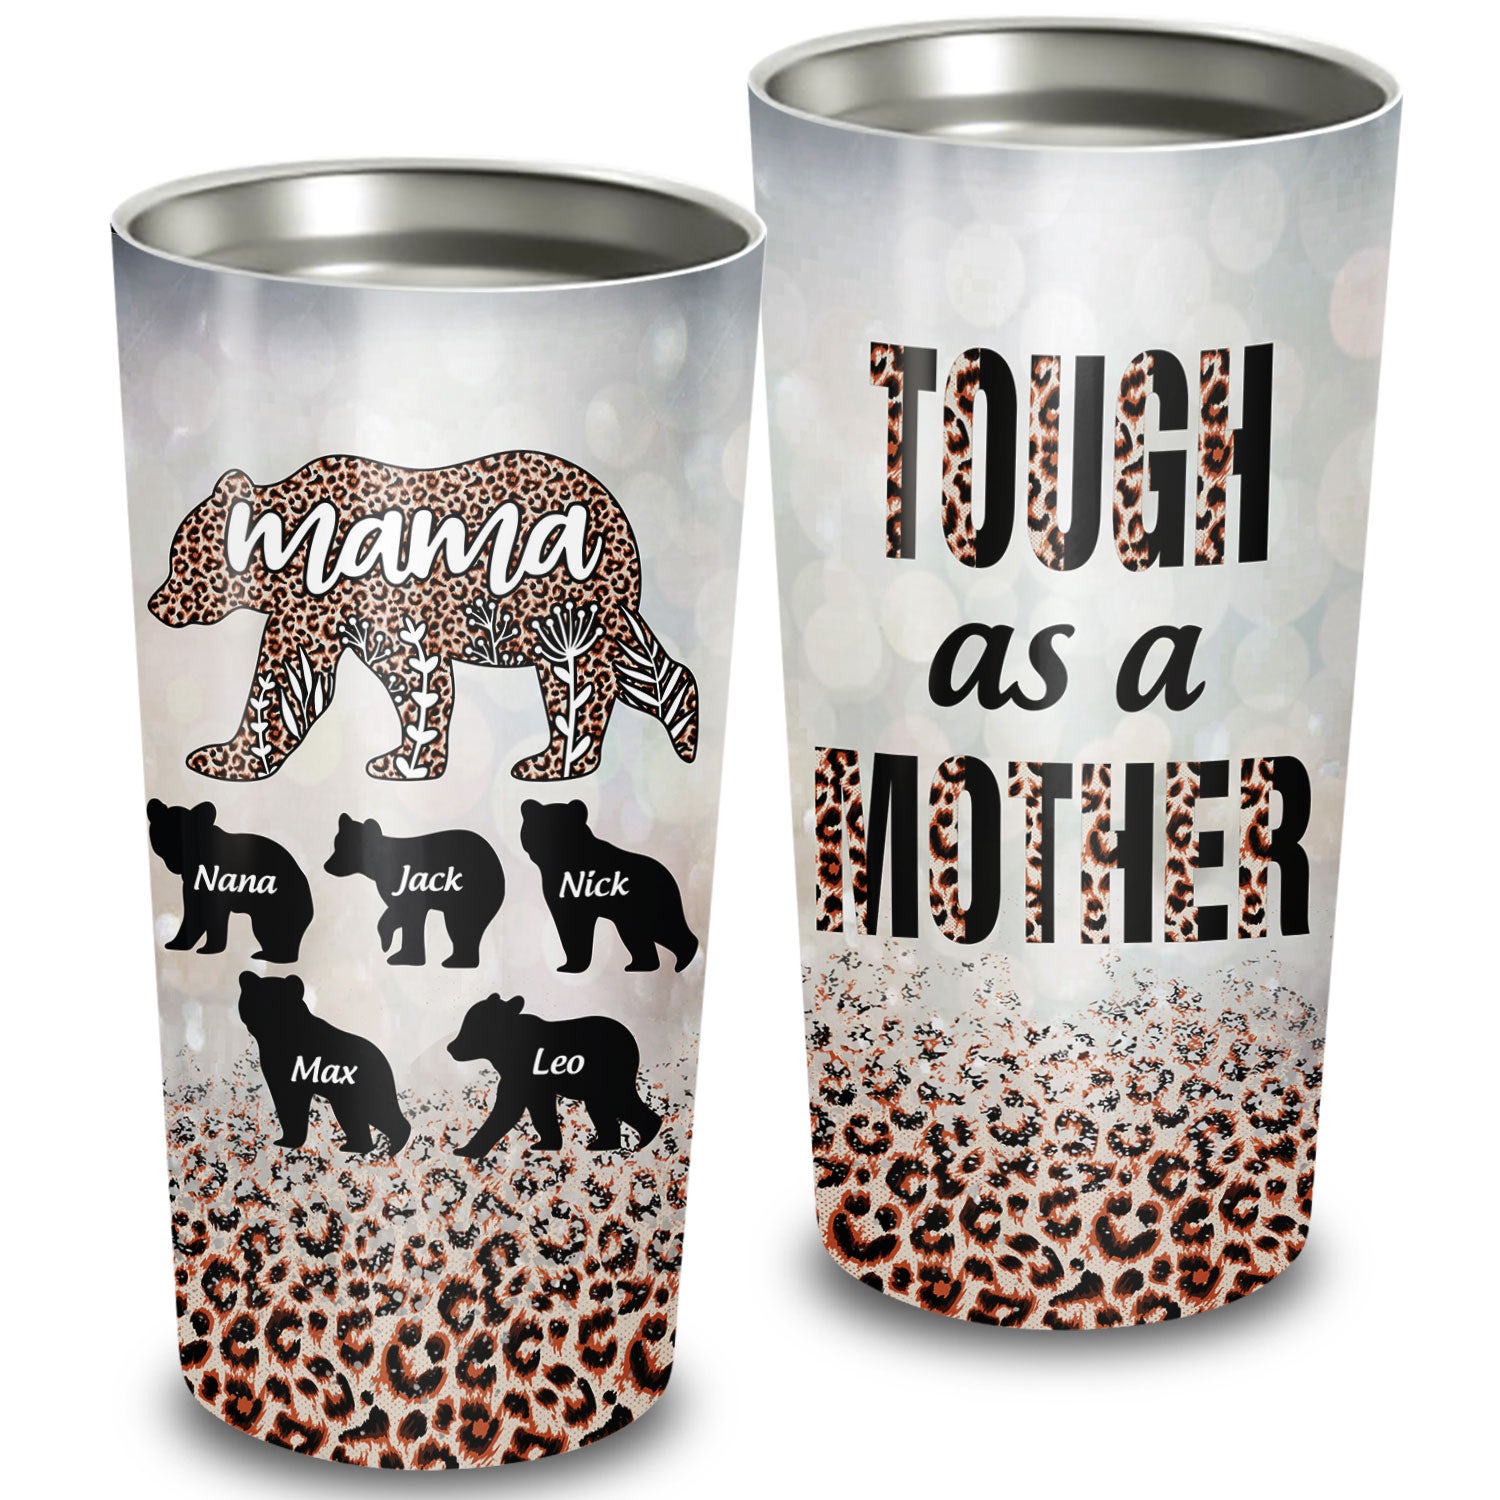 Personalized Mom Gifts From Daughter, To My Mom 20oz Stainless Steel  Tumbler, Sunflower Mom Cup, Mothers Day Gifts For Mom, New Mom, Bonus Mom,  Novelty Gift For Mommy On Valentine, Birthday 